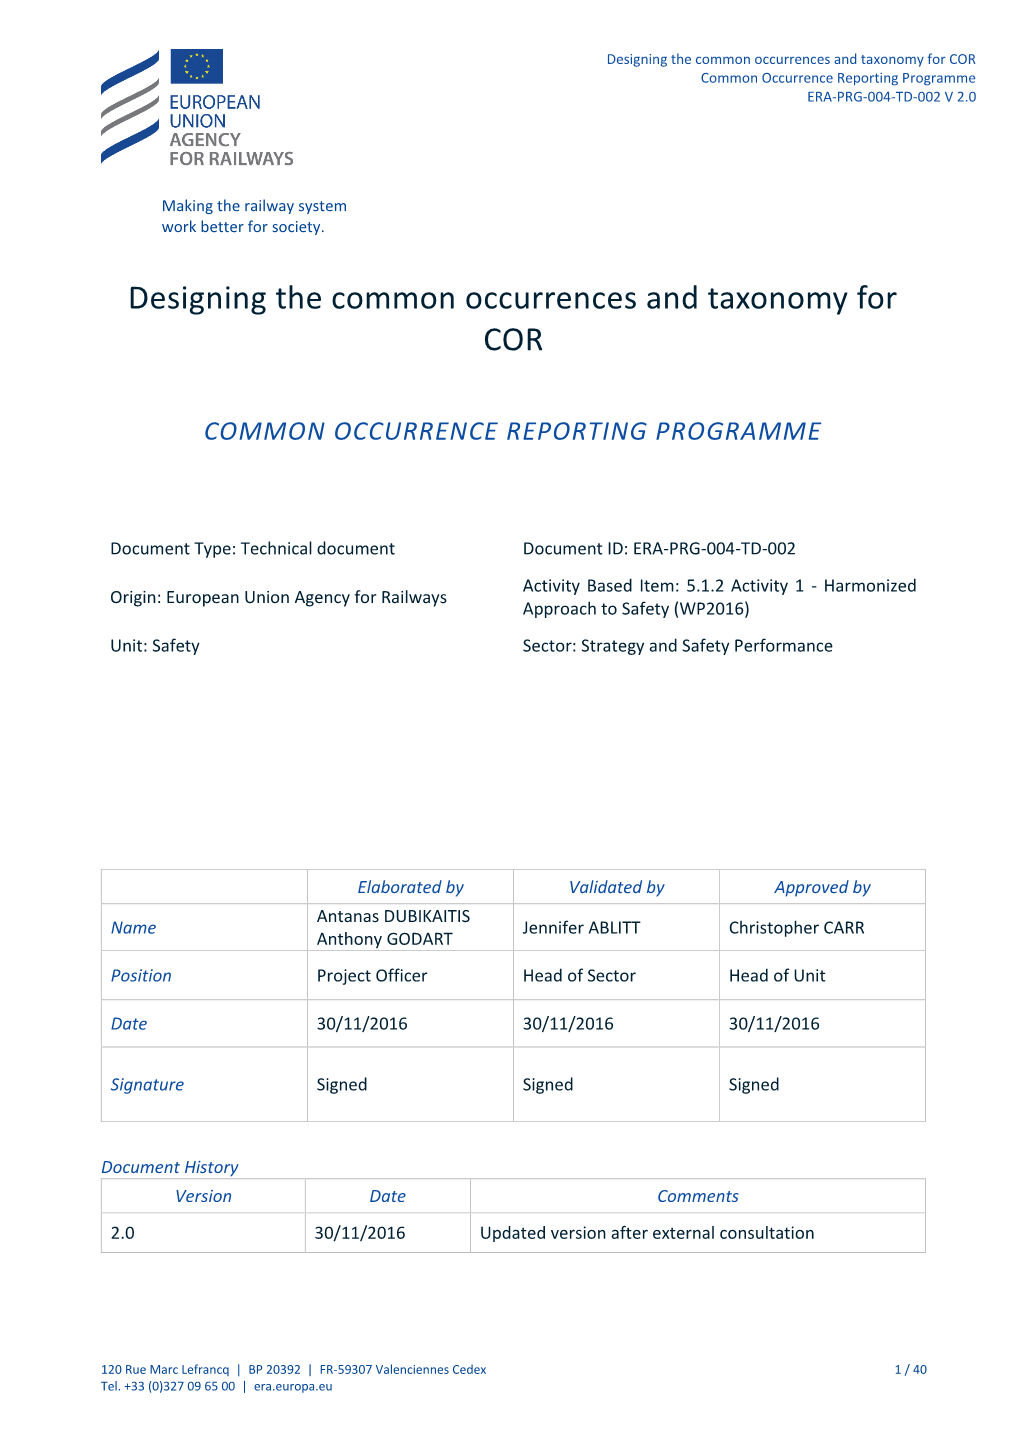 Designing the Common Occurrences and Taxonomy for COR Common Occurrence Reporting Programme ERA-PRG-004-TD-002 V 2.0